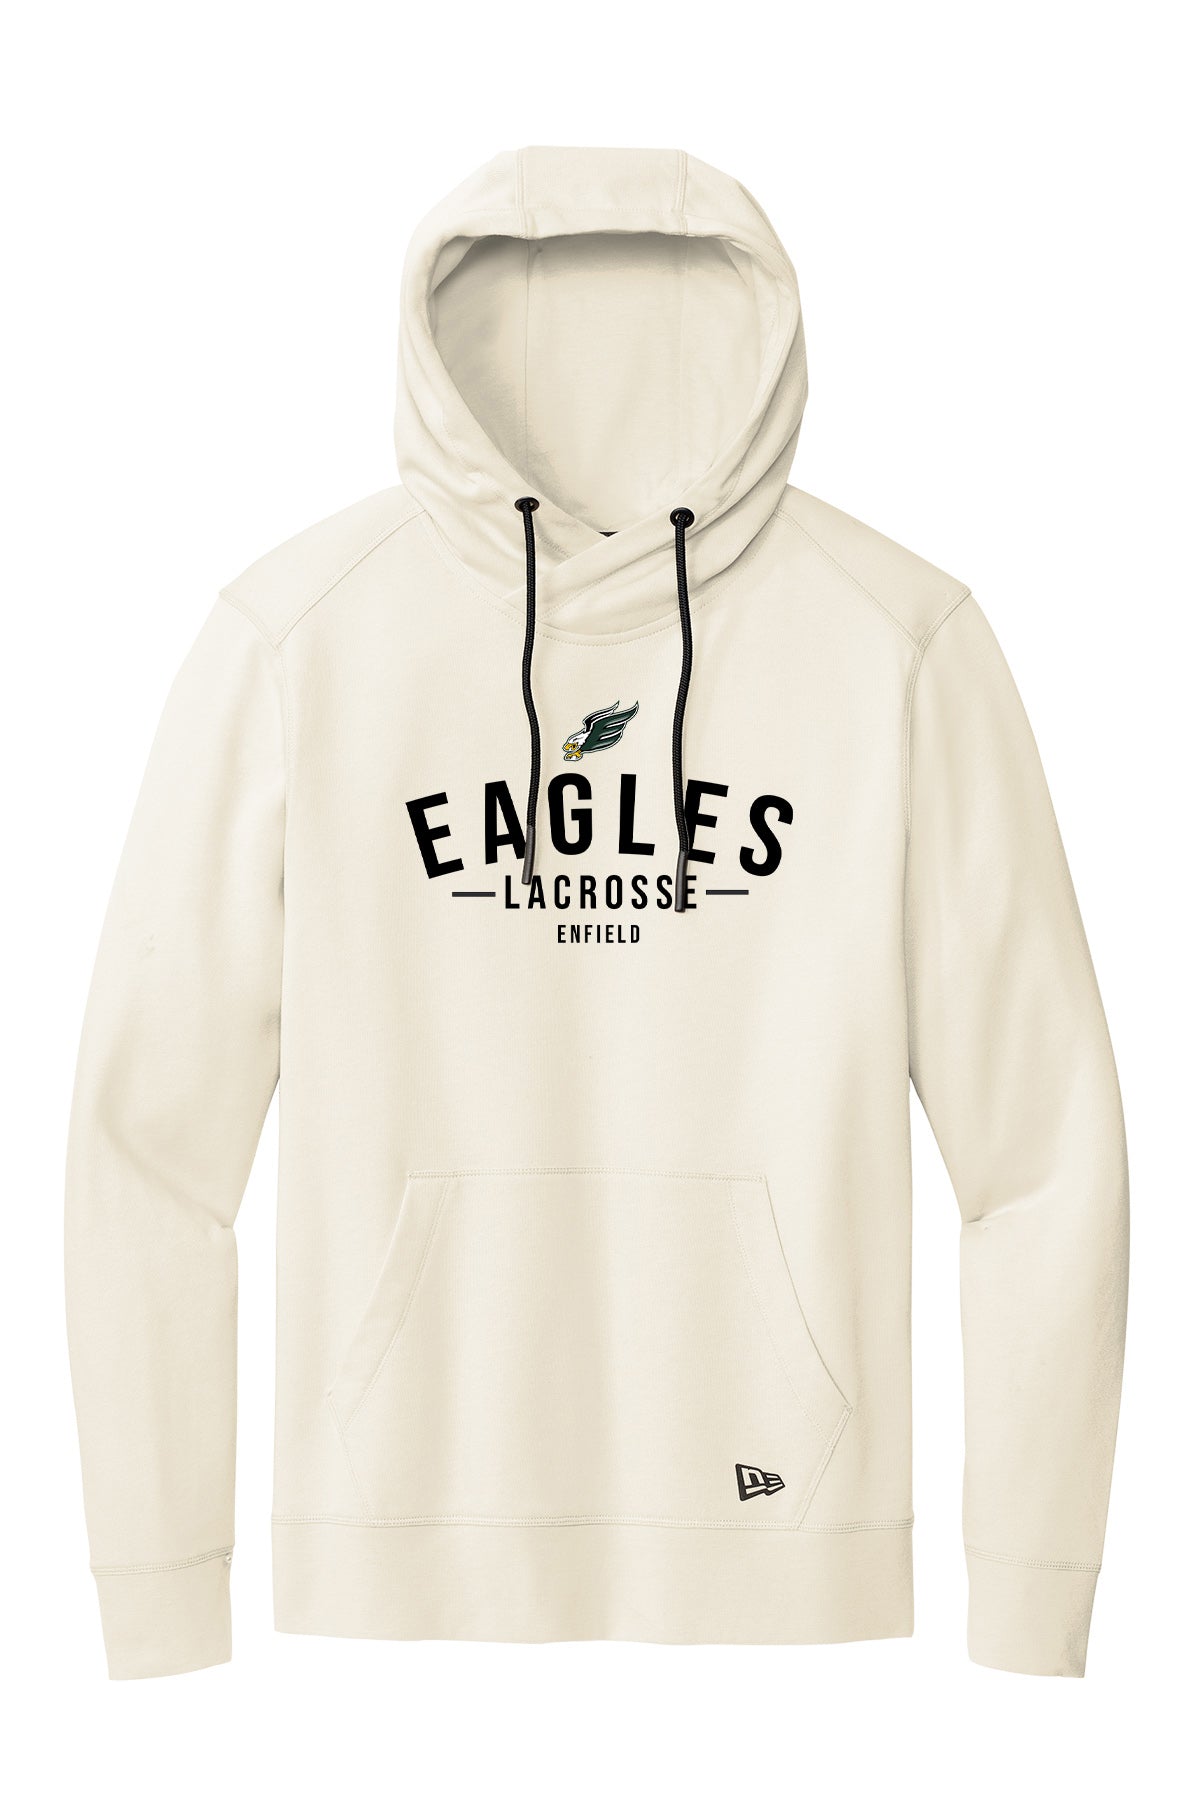 Enfield Lacrosse Adult Hoodie "Classic" - NEA510 (color options available)